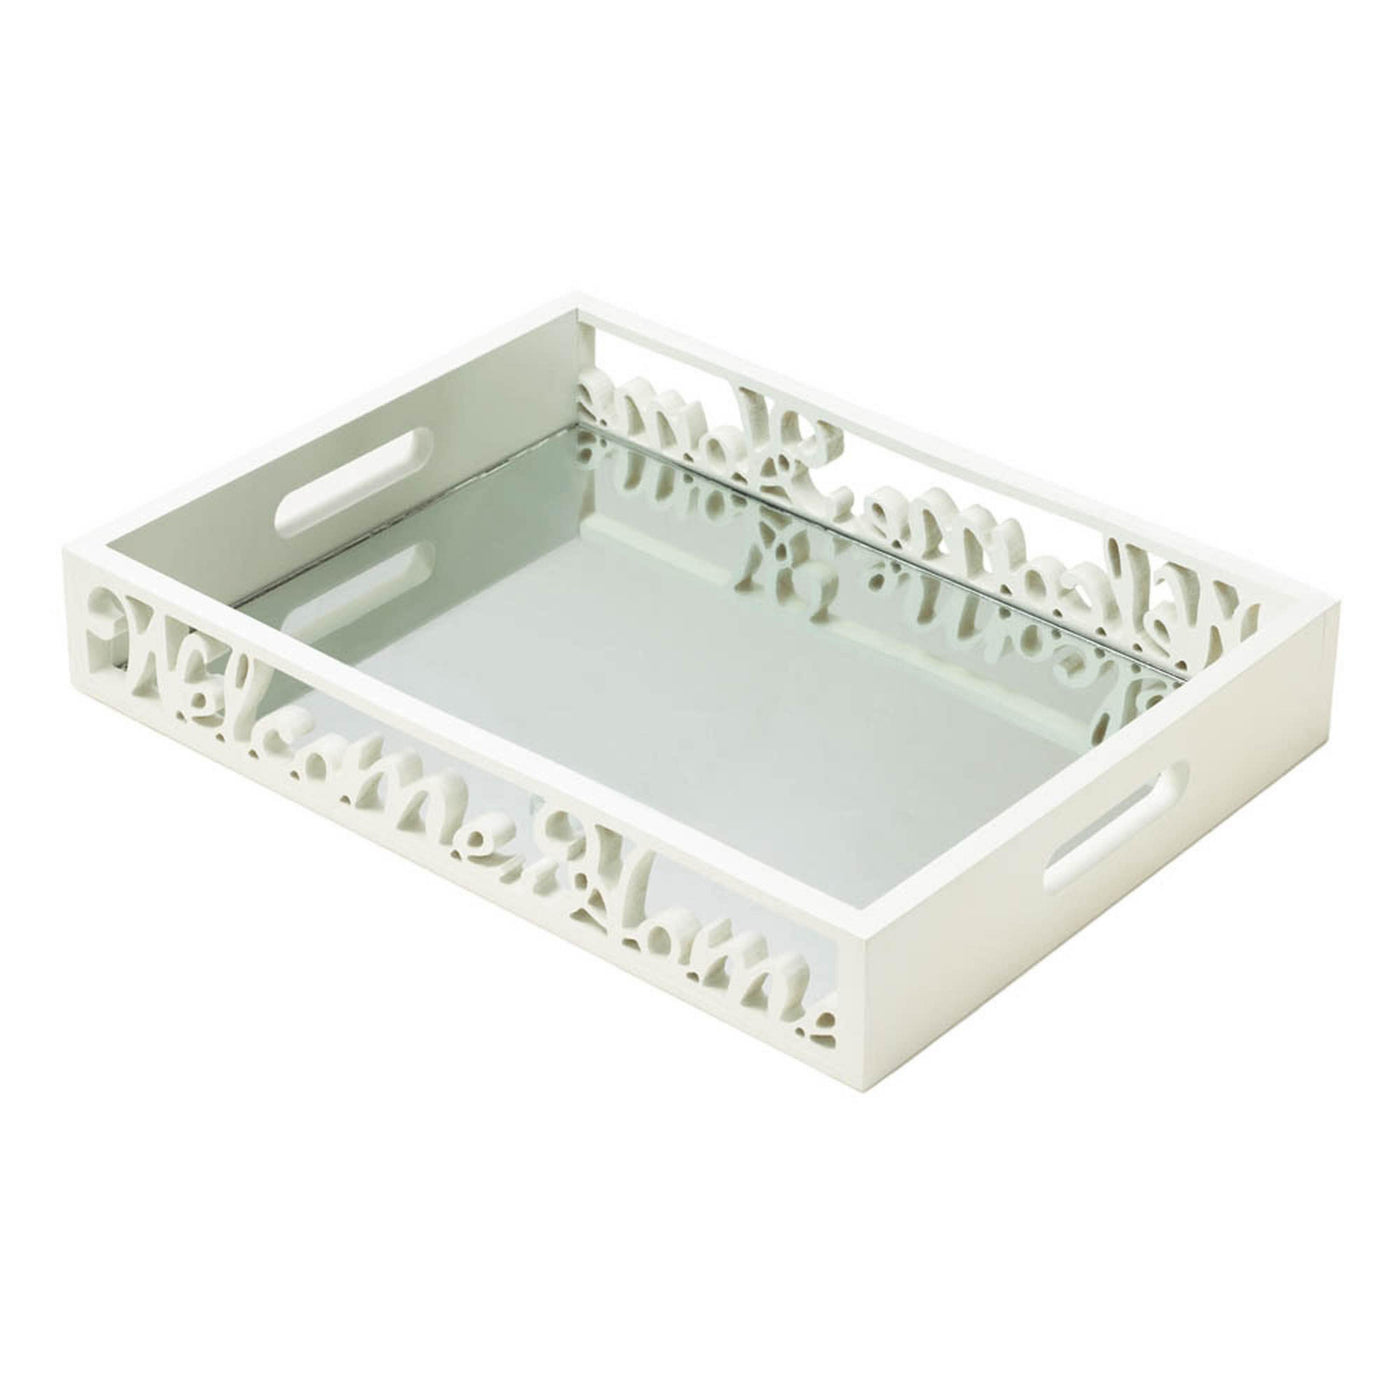 Welcome Home Reflective Mirror Tray